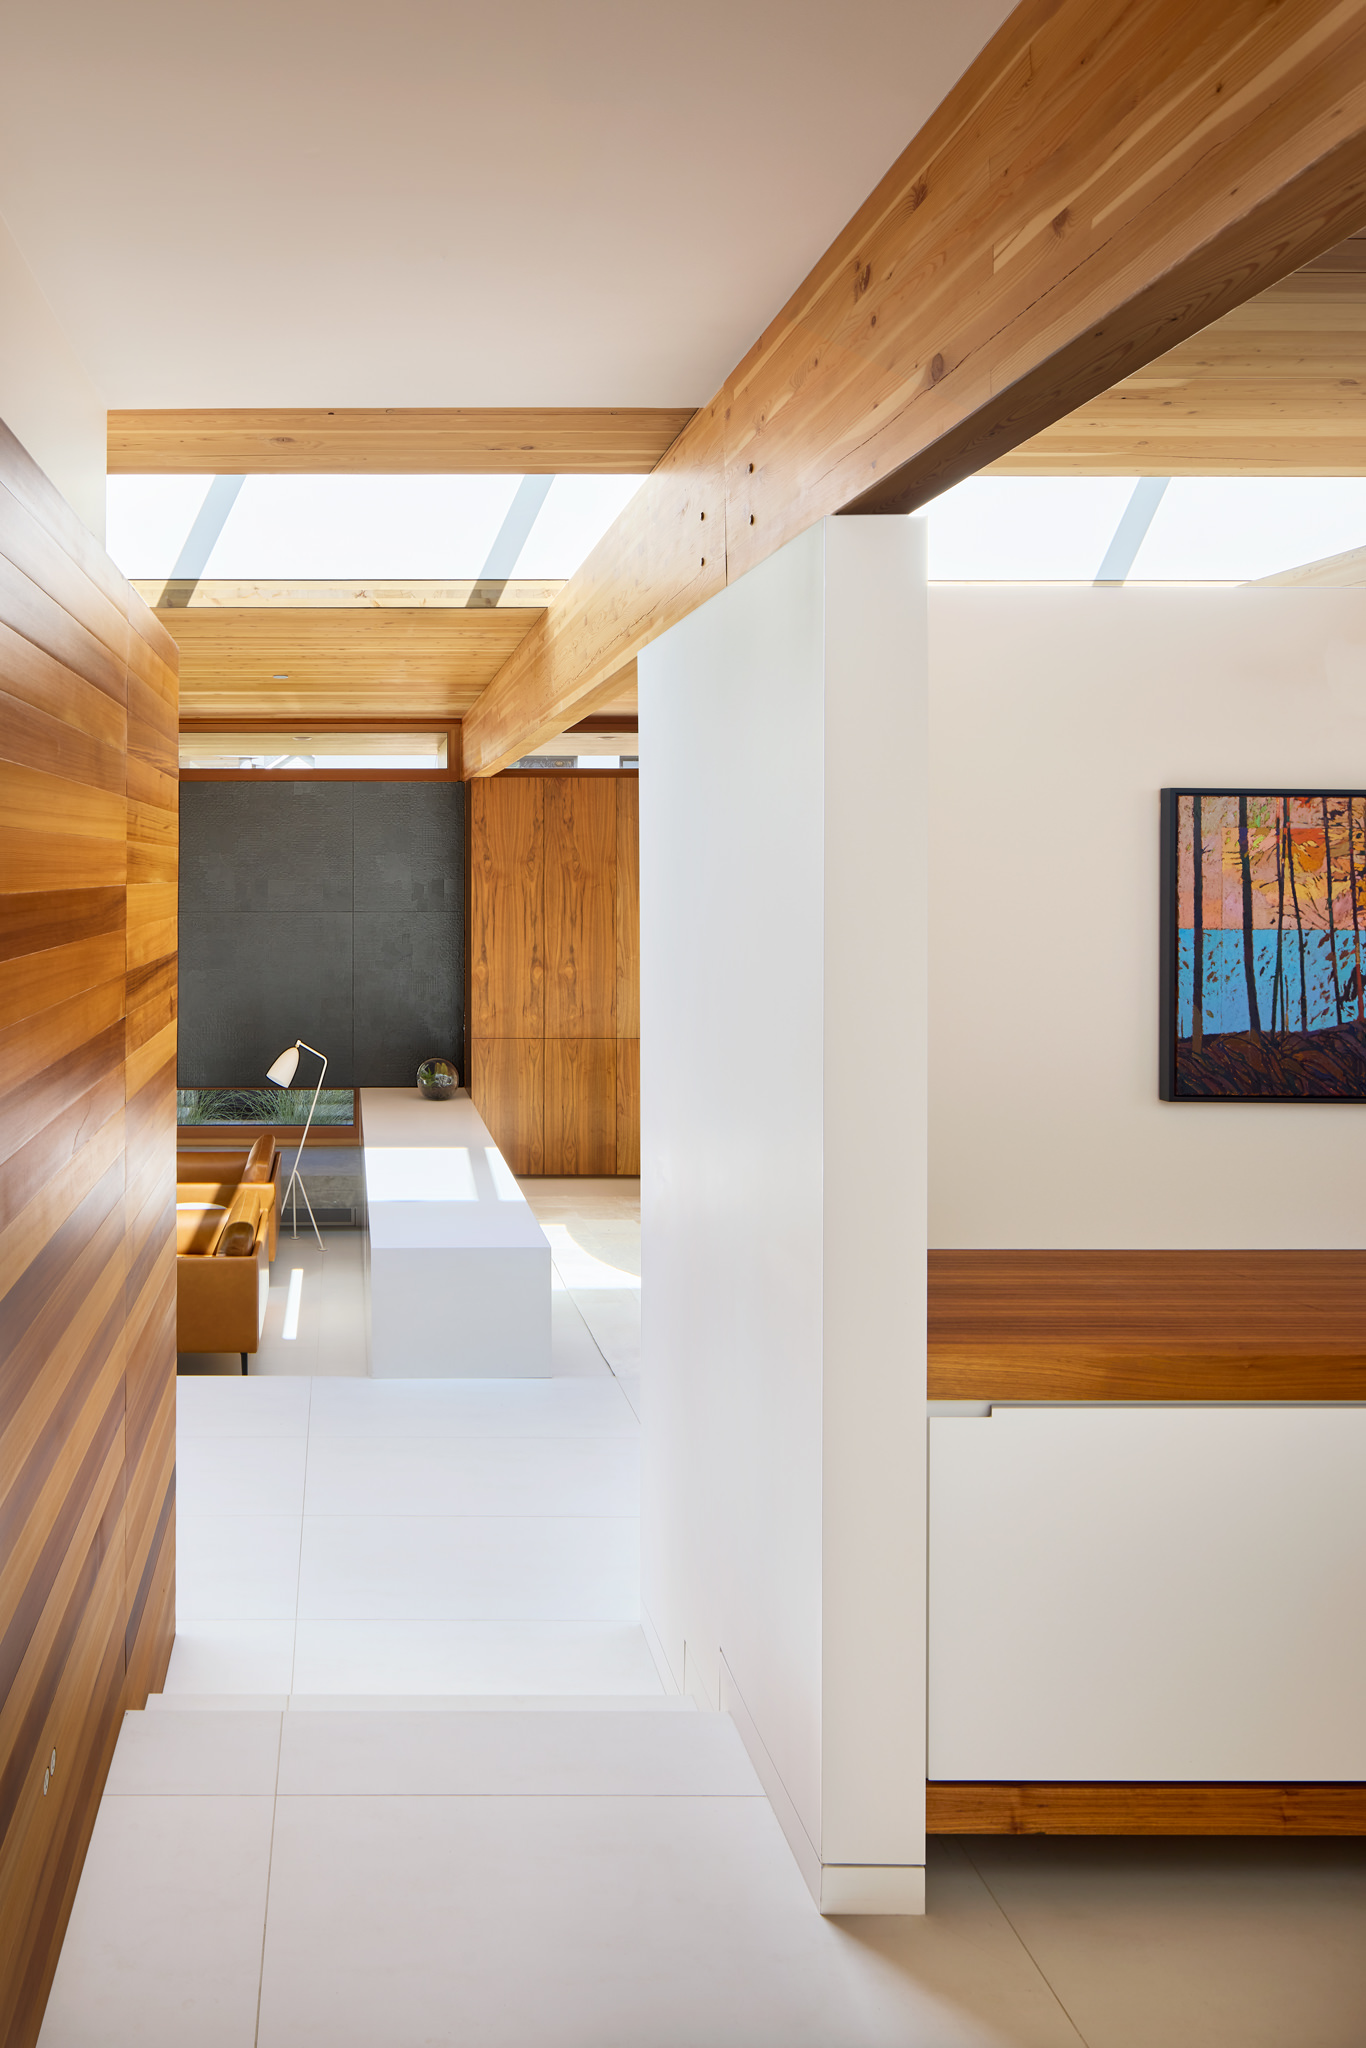 Interior view of modern home with wood walls and beams